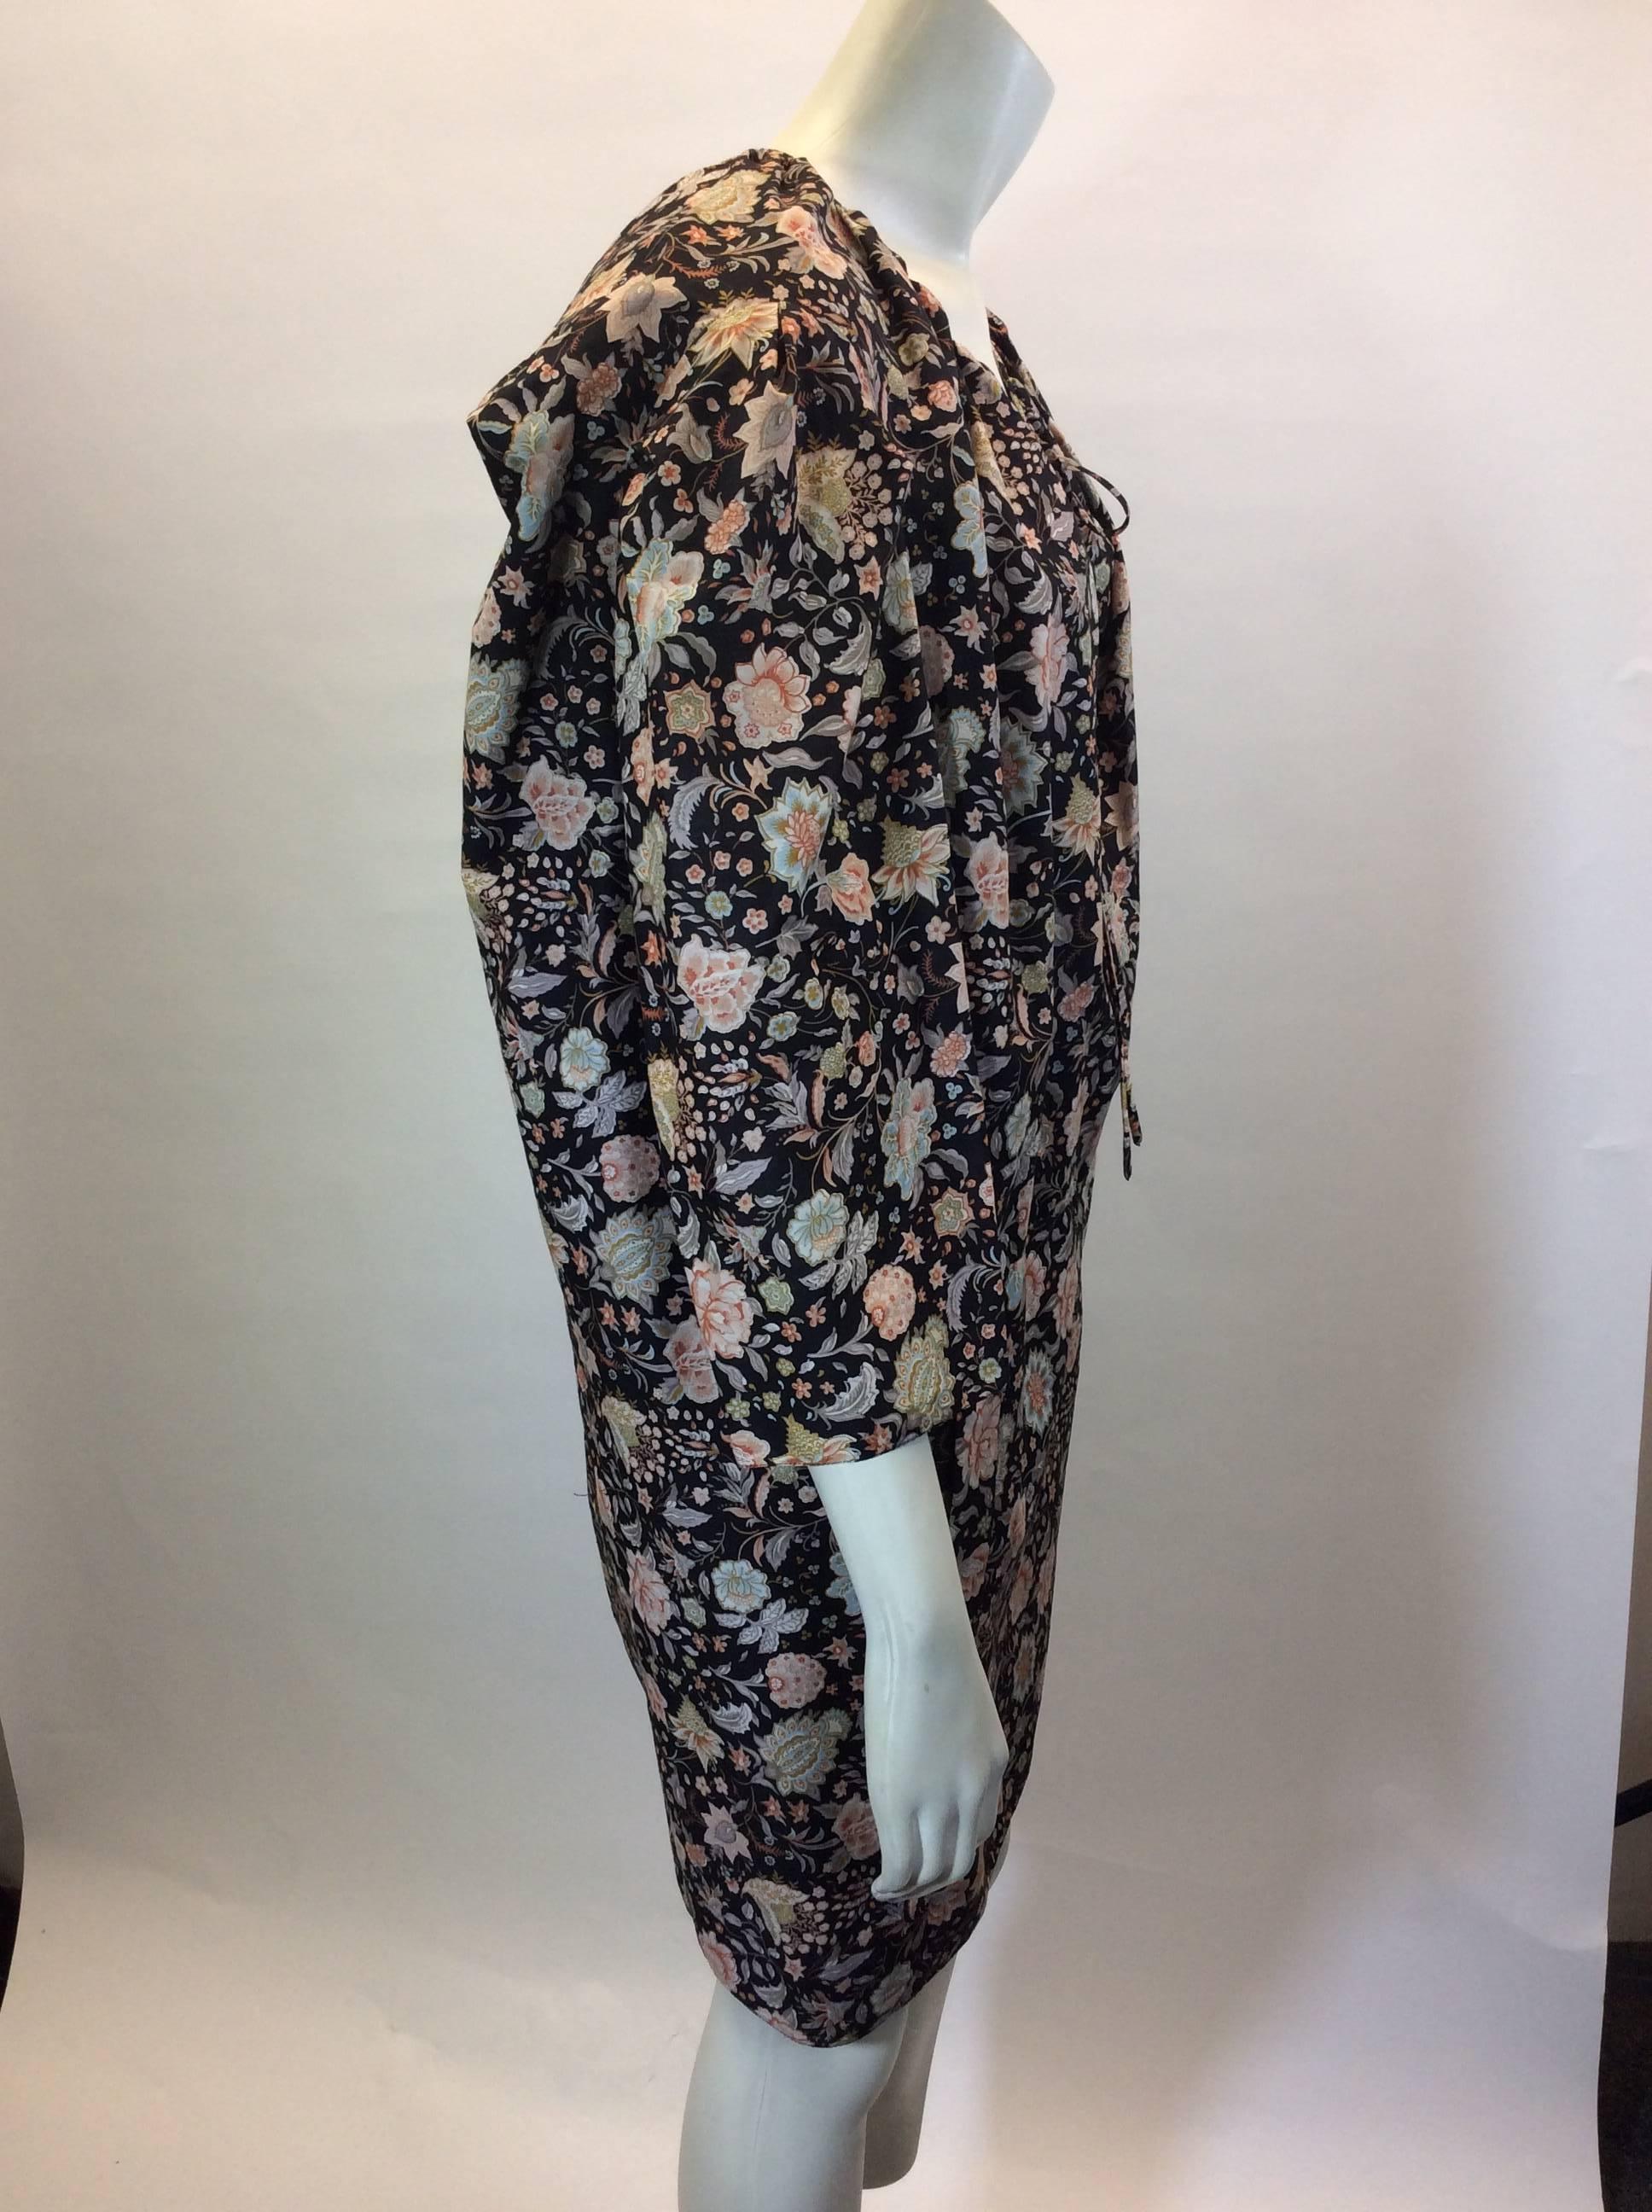 Balenciaga Black Printed Cotton Dress In Excellent Condition For Sale In Narberth, PA